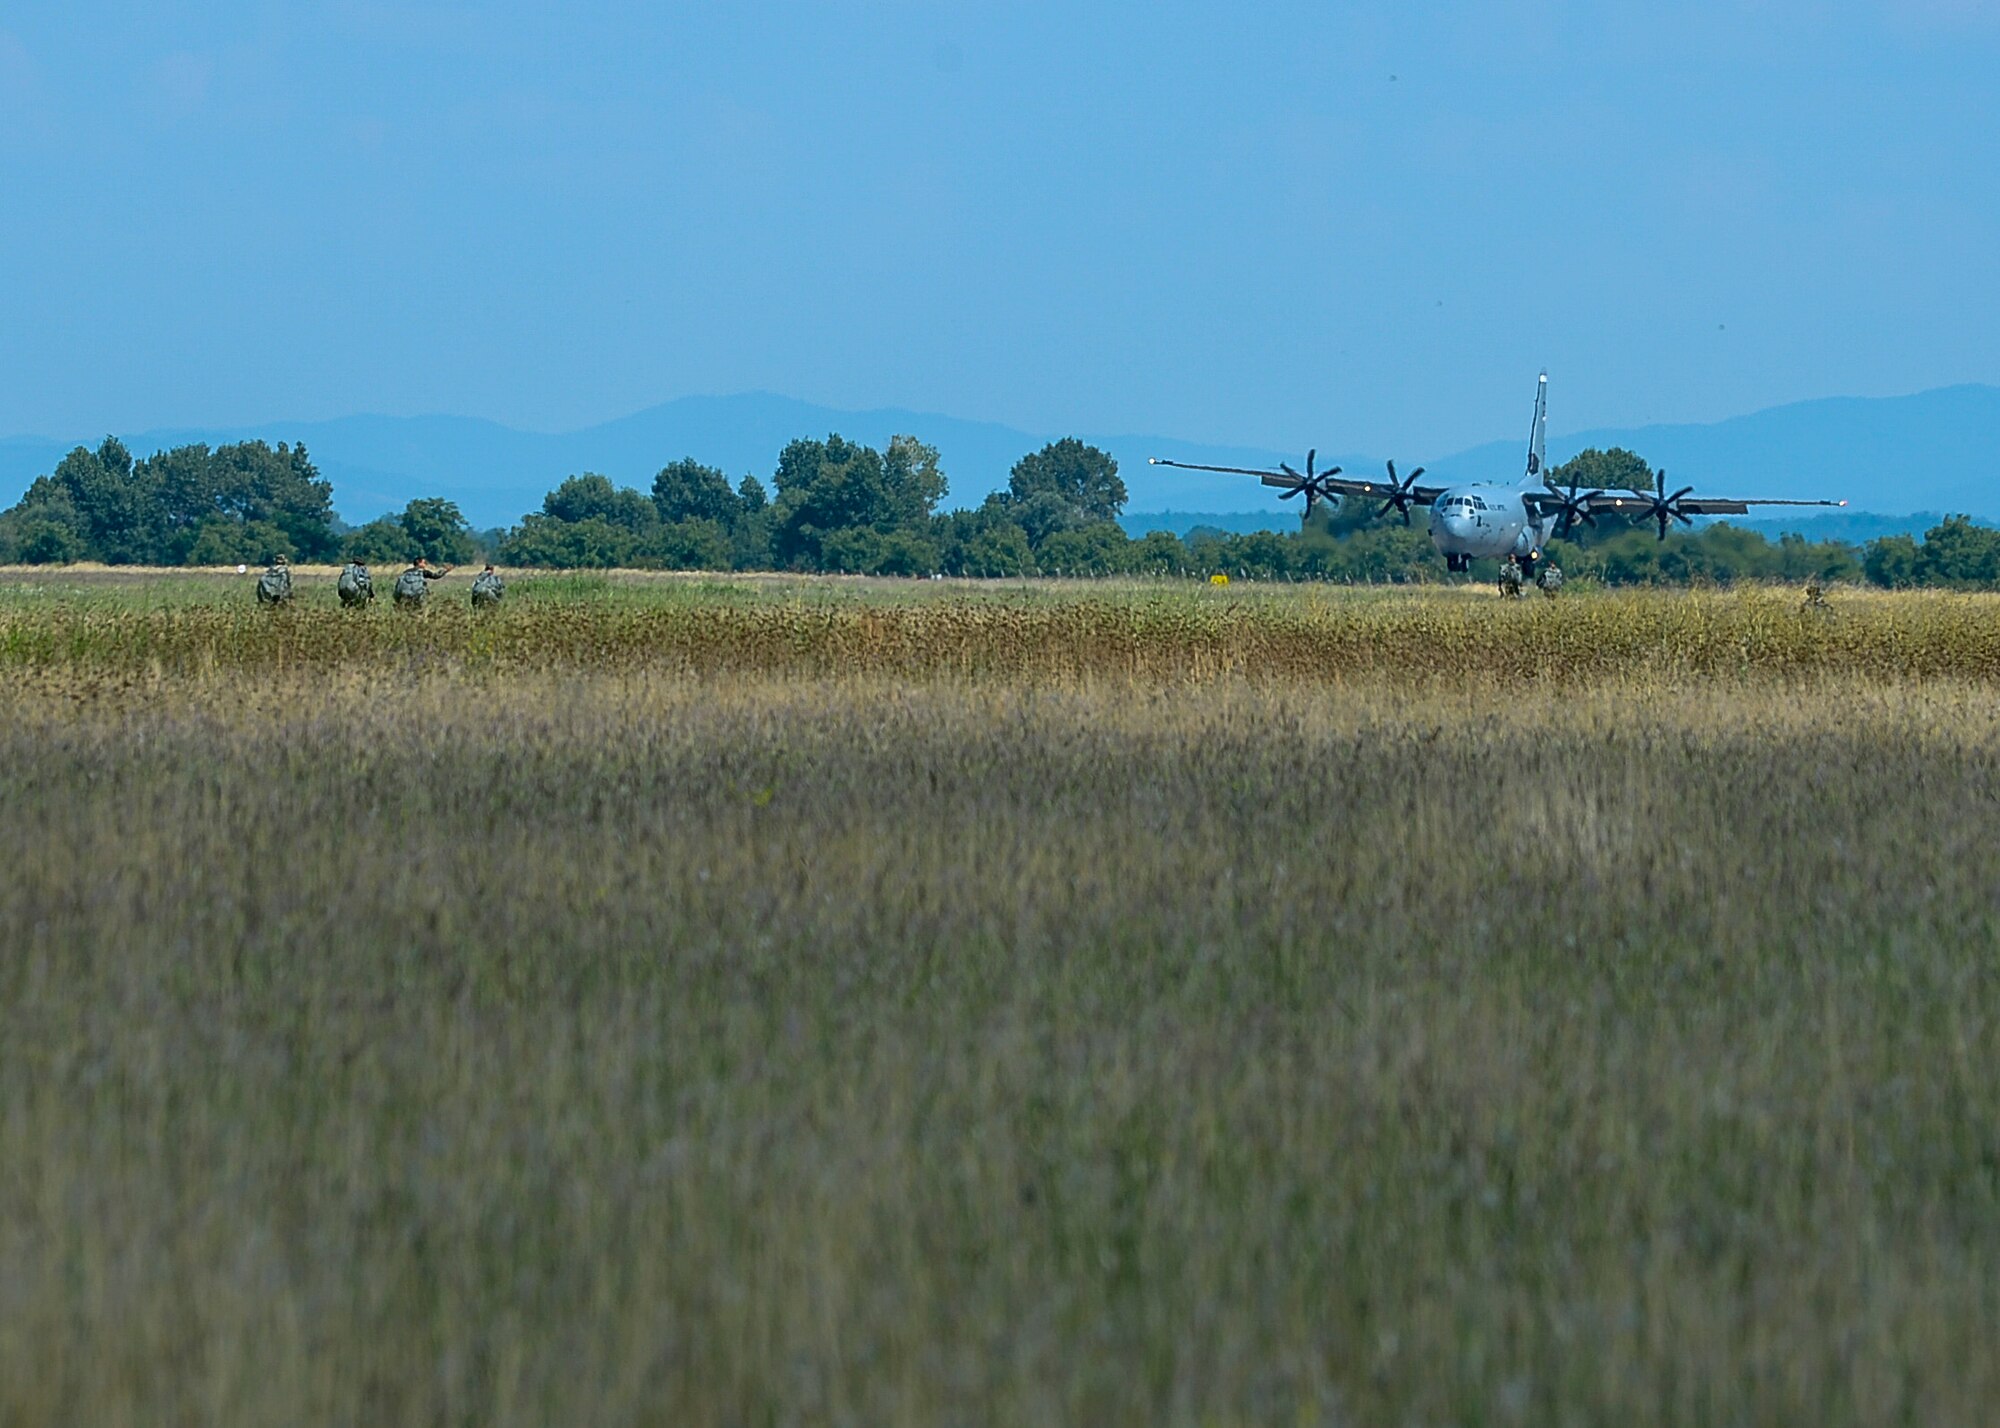 A U.S. Air Force C-130J Super Hercules aircraft lands during Thracian Summer 2018 after performing a personnel drop with Bulgarians in Plovdiv, Bulgaria, July 13, 2018. During the exercise, the 37th Airlift Squadron worked on personnel and equipment airdrops both during day and night operations. (U.S. Air Force photo by Staff Sgt. Jimmie D. Pike)